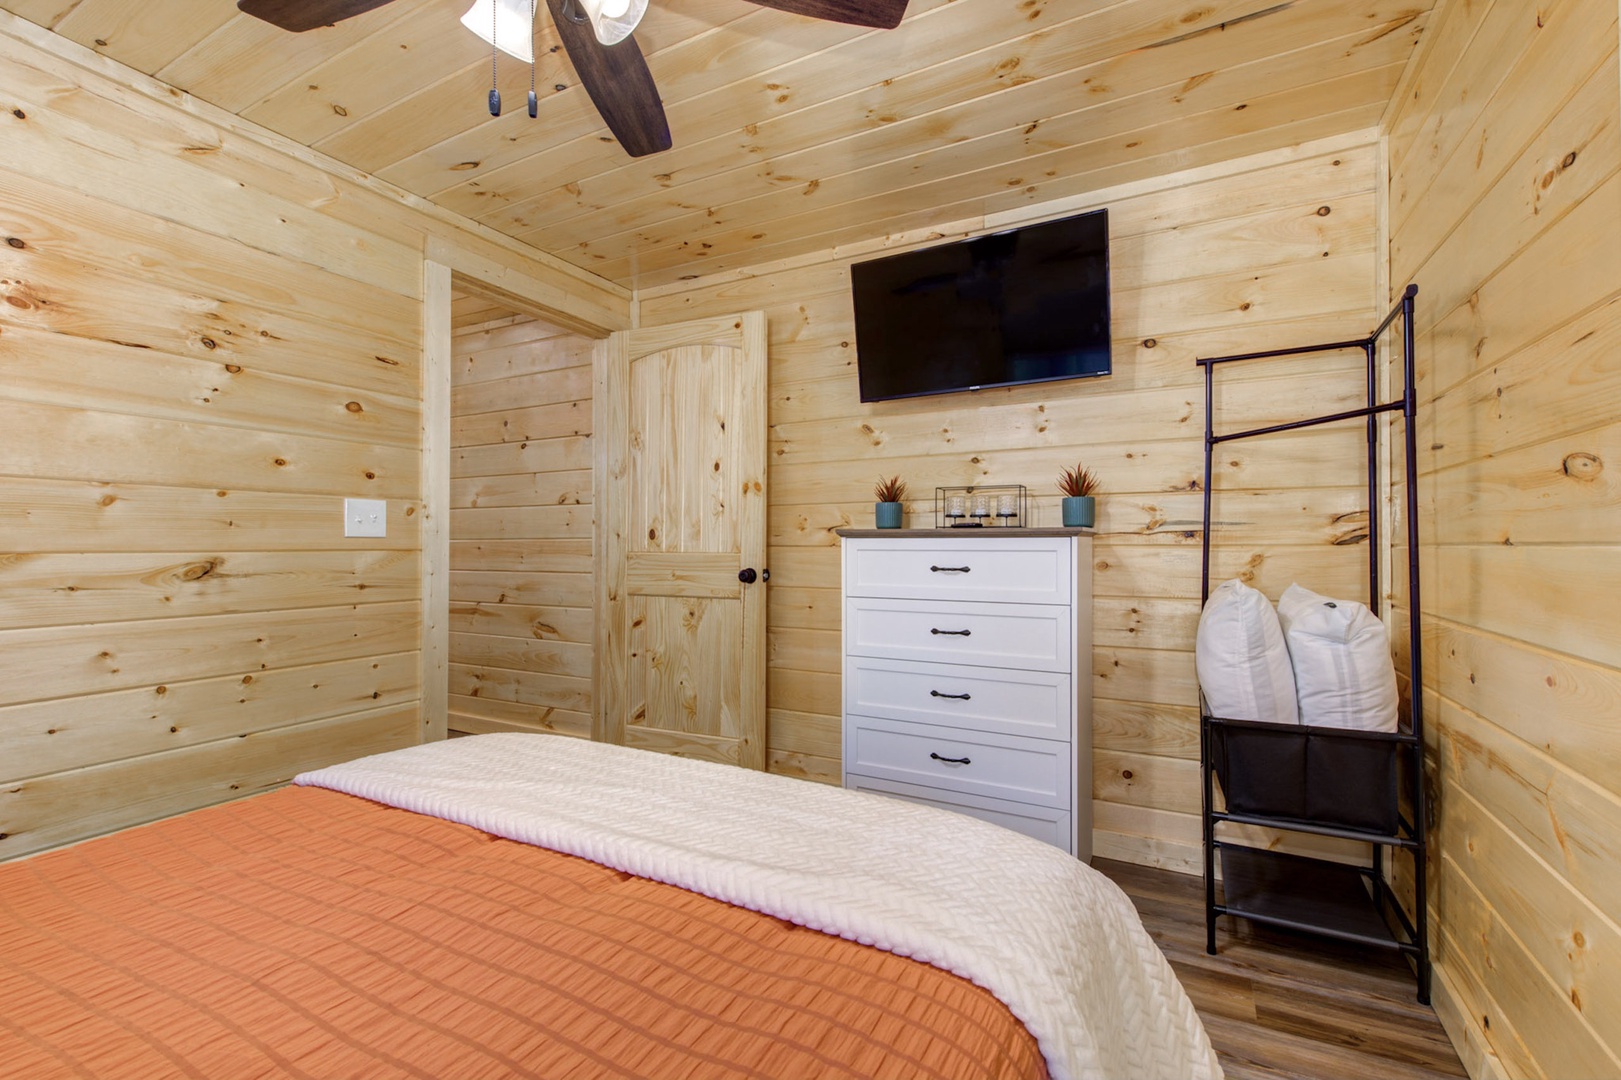 The first bedroom retreat offers a plush queen-sized bed & TV